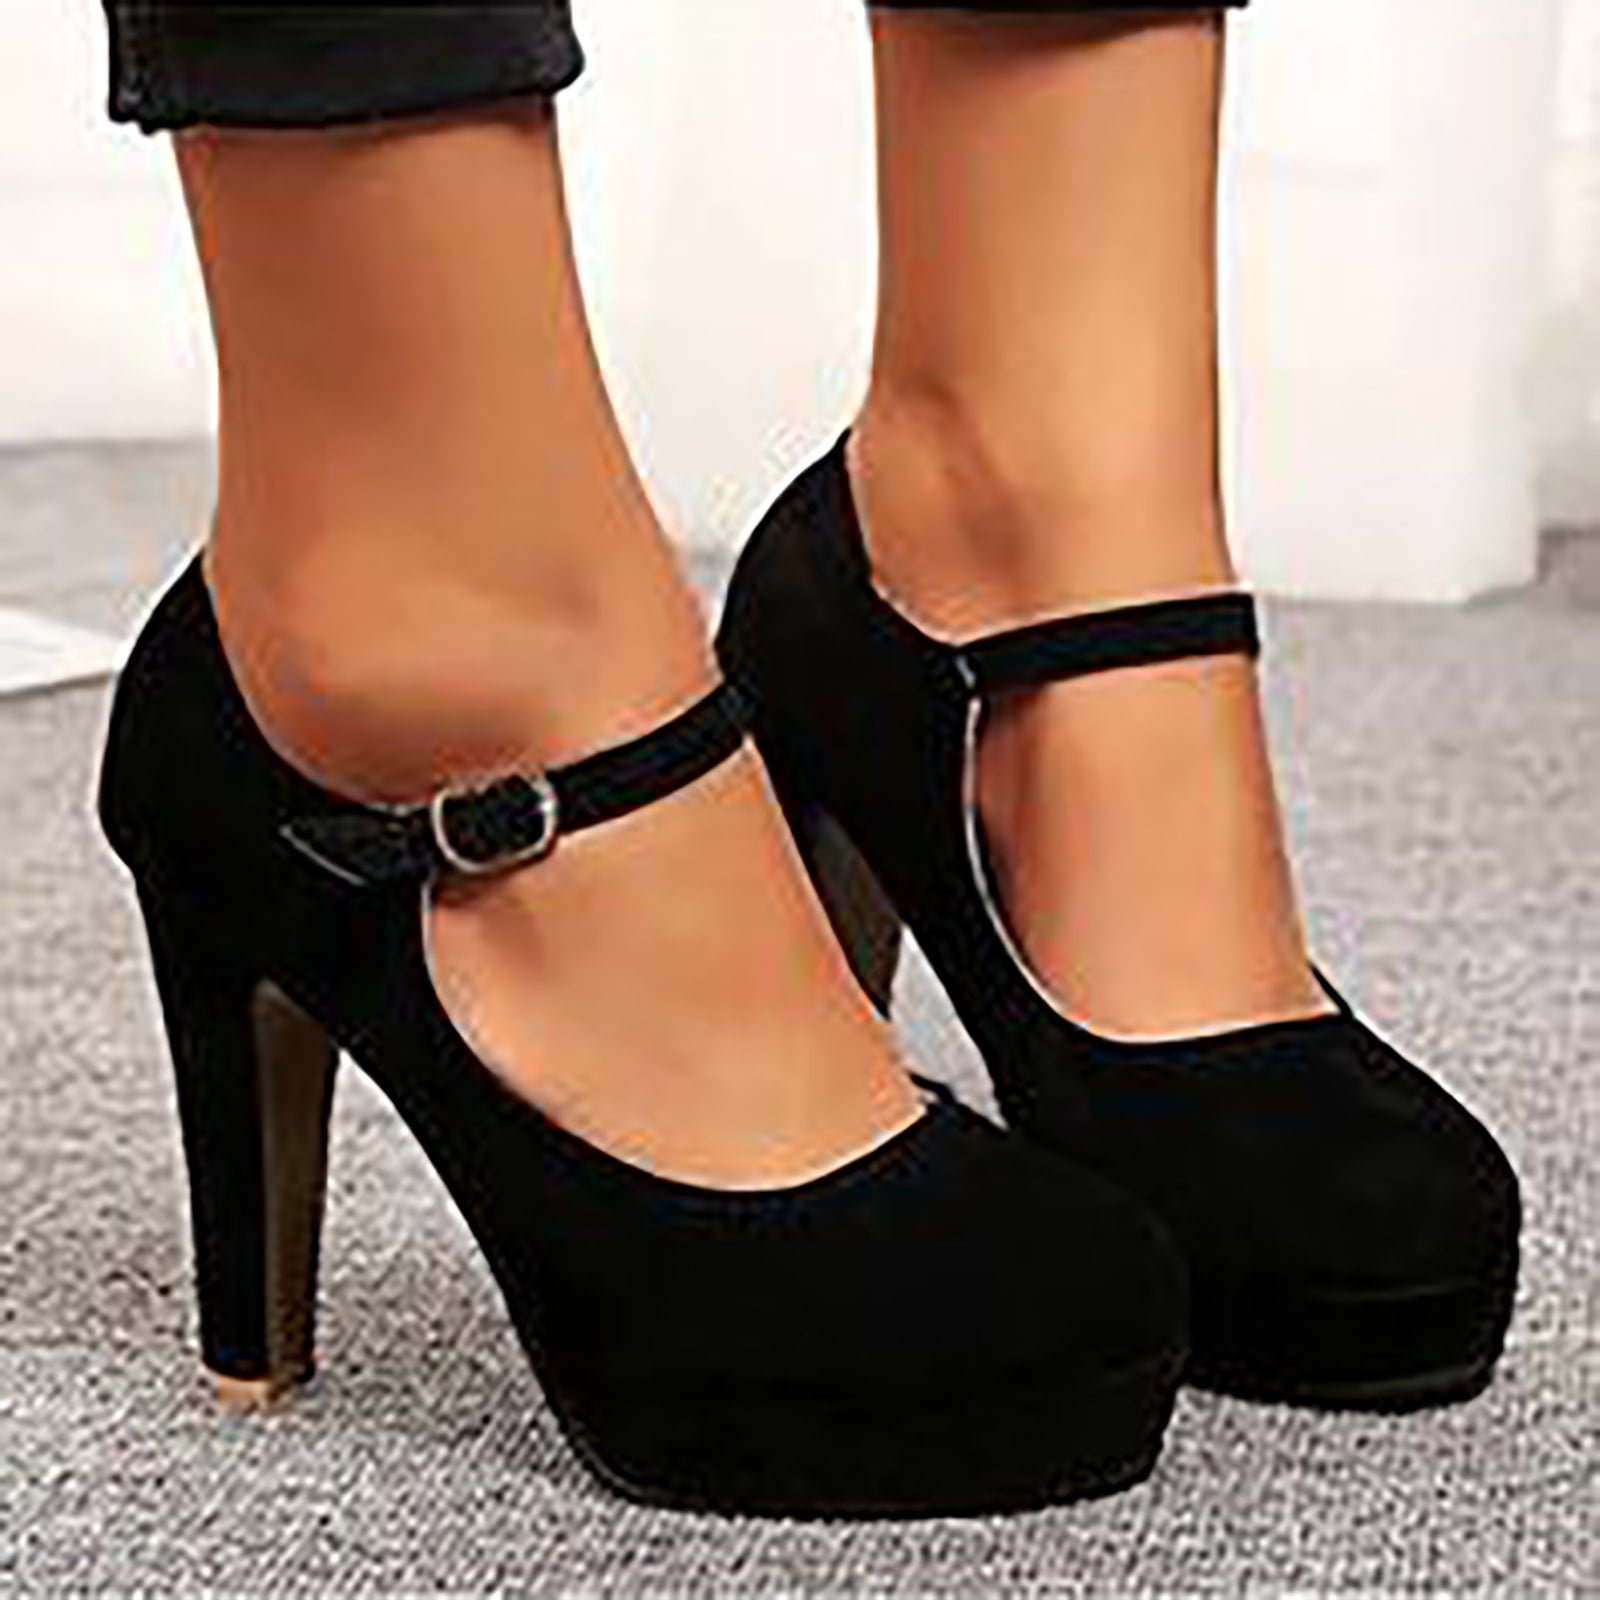 New Womens High Heel Pumps Mary Jane Ankle Strap Buckle Platform Shoes All US Sz 